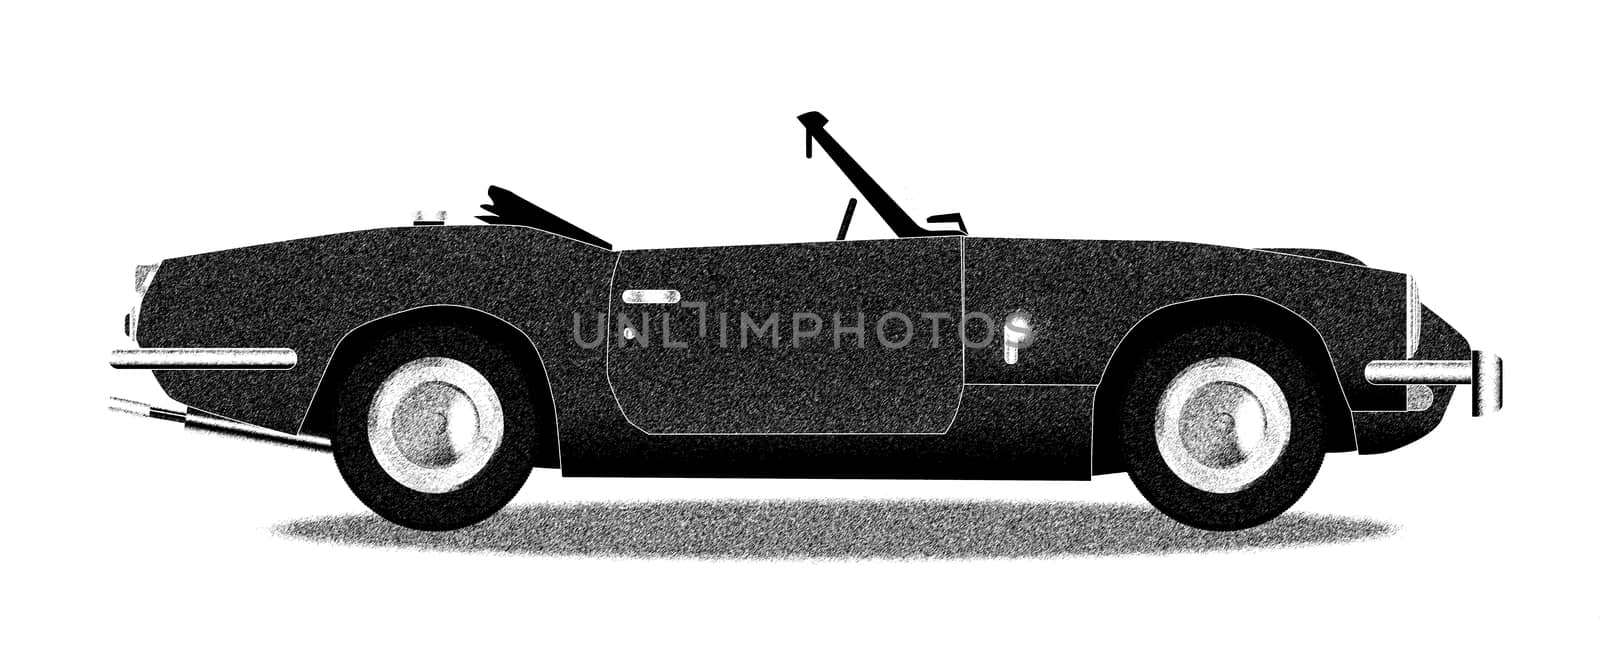 A classic old British sports car sketch on white